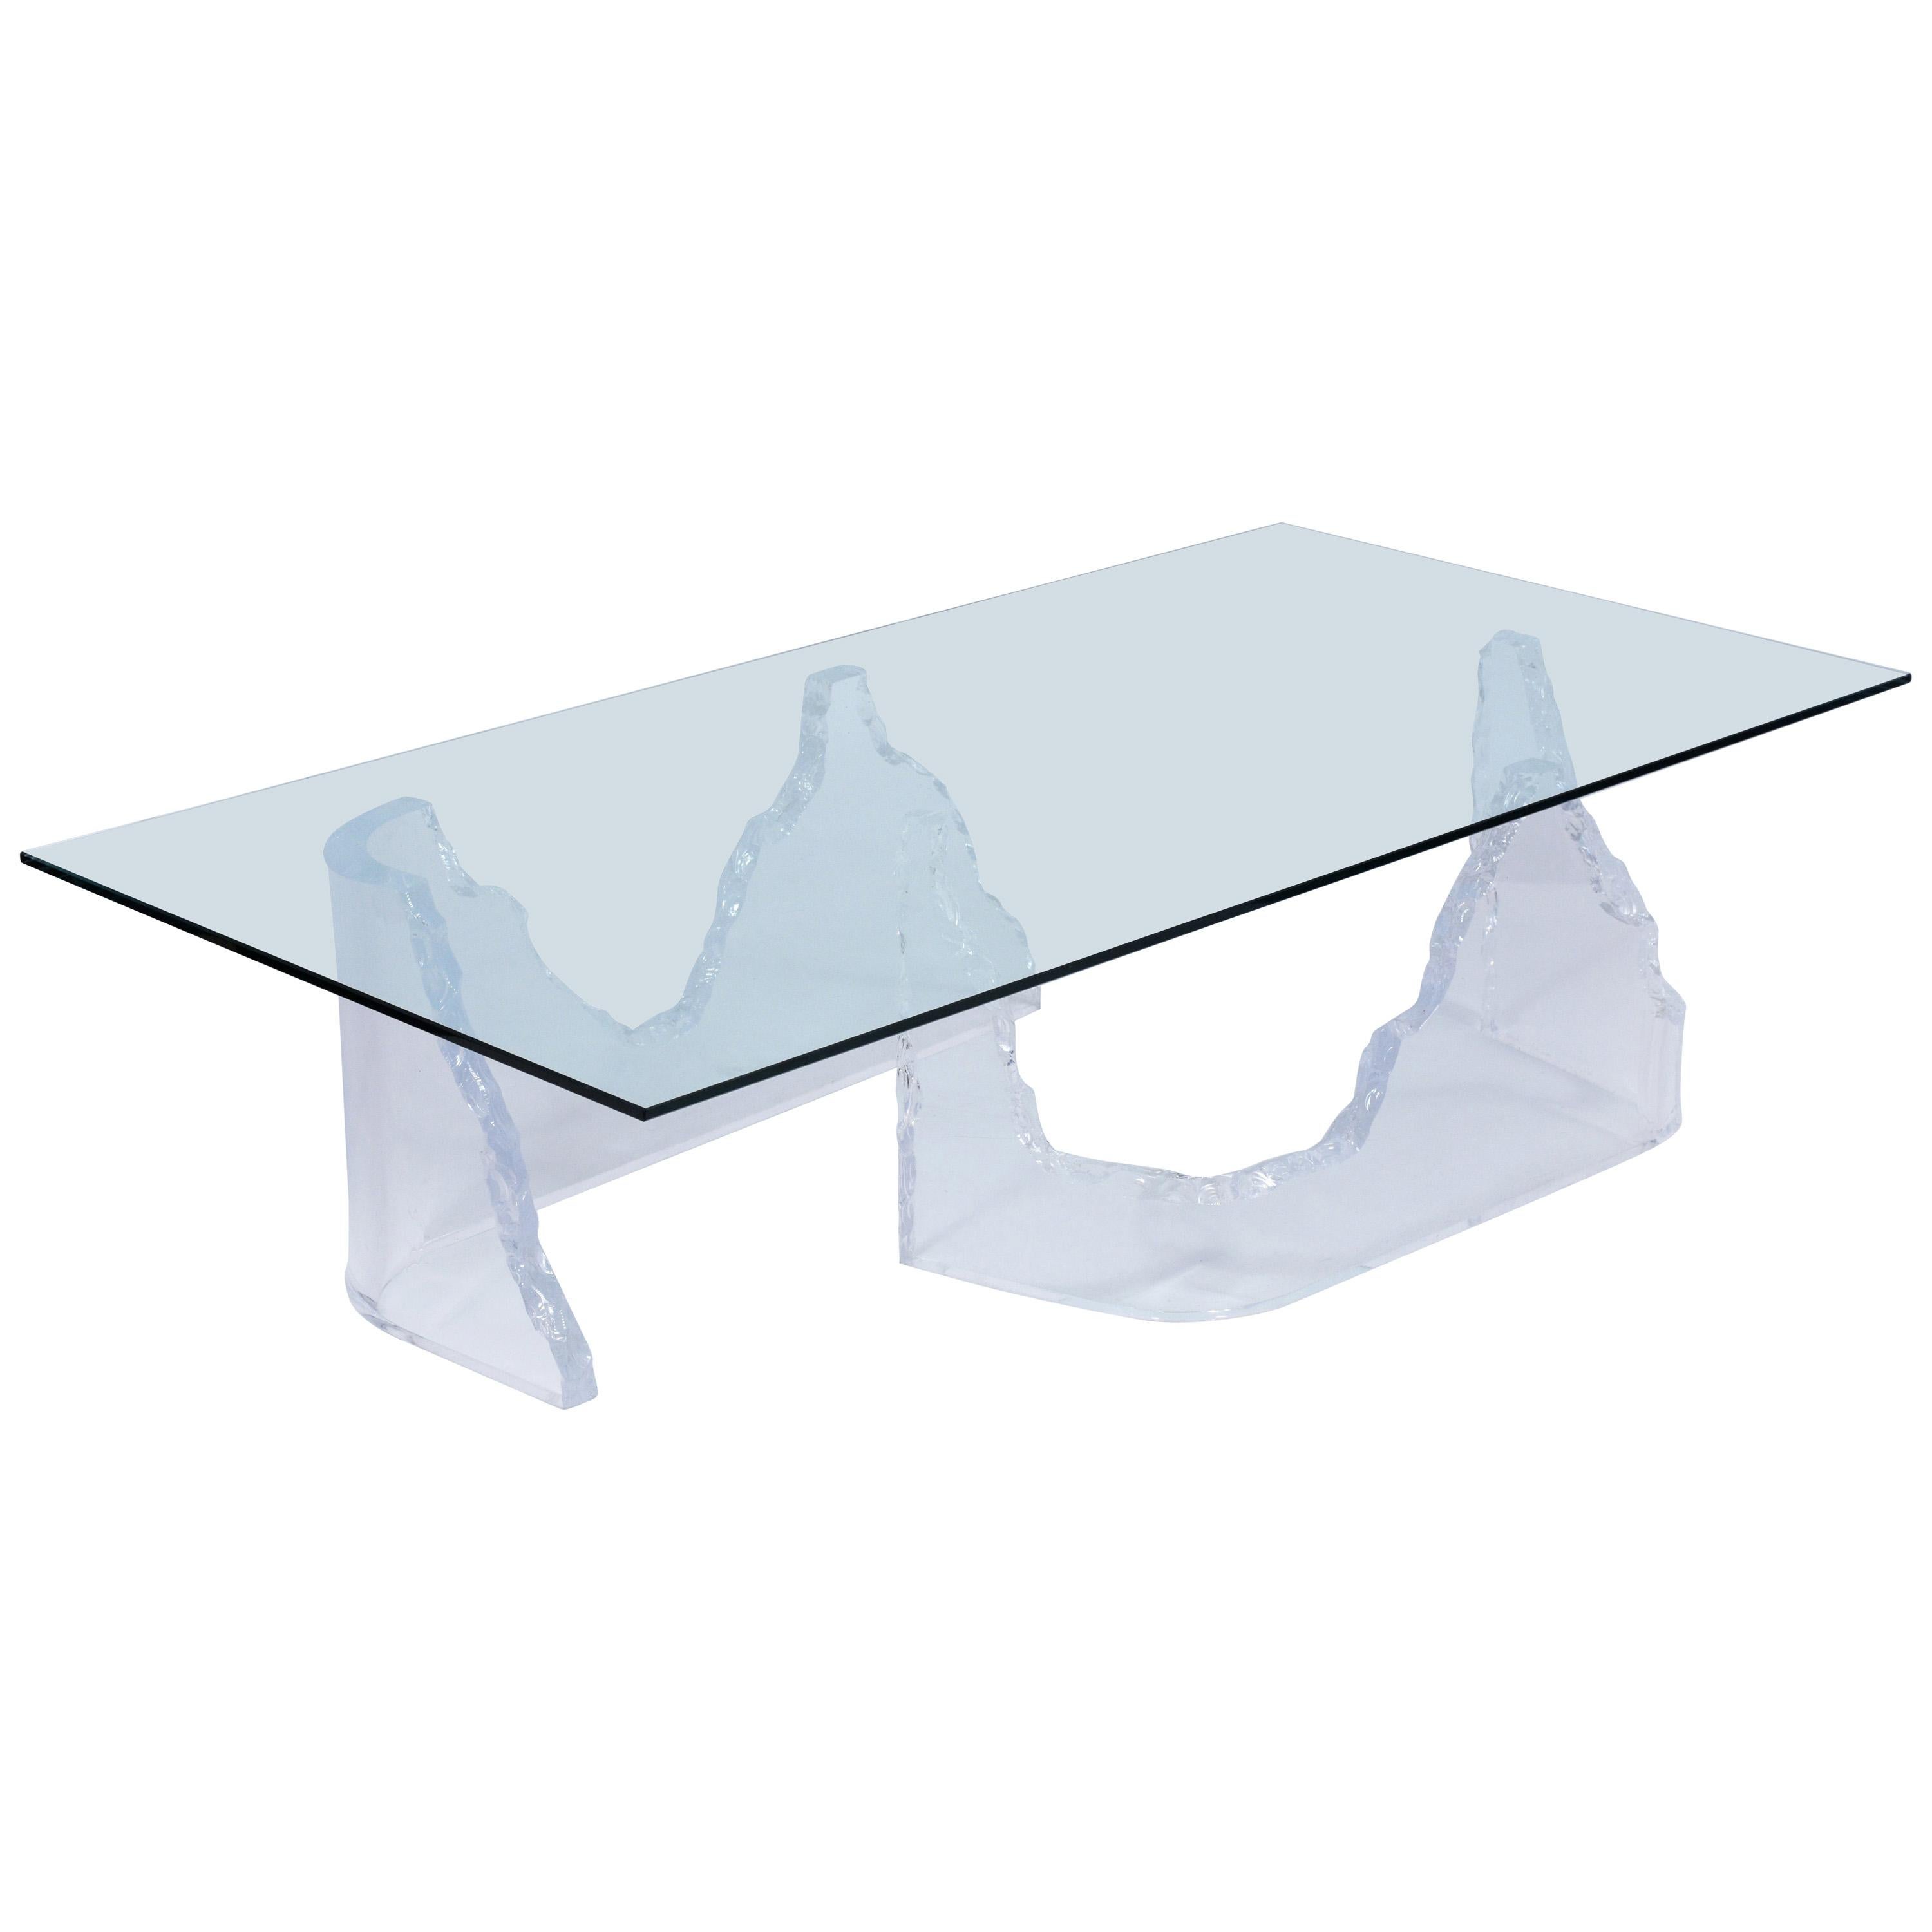 Extraordinary Mid-Century-Style Lucite Cocktail Table with Iceberg Design Base